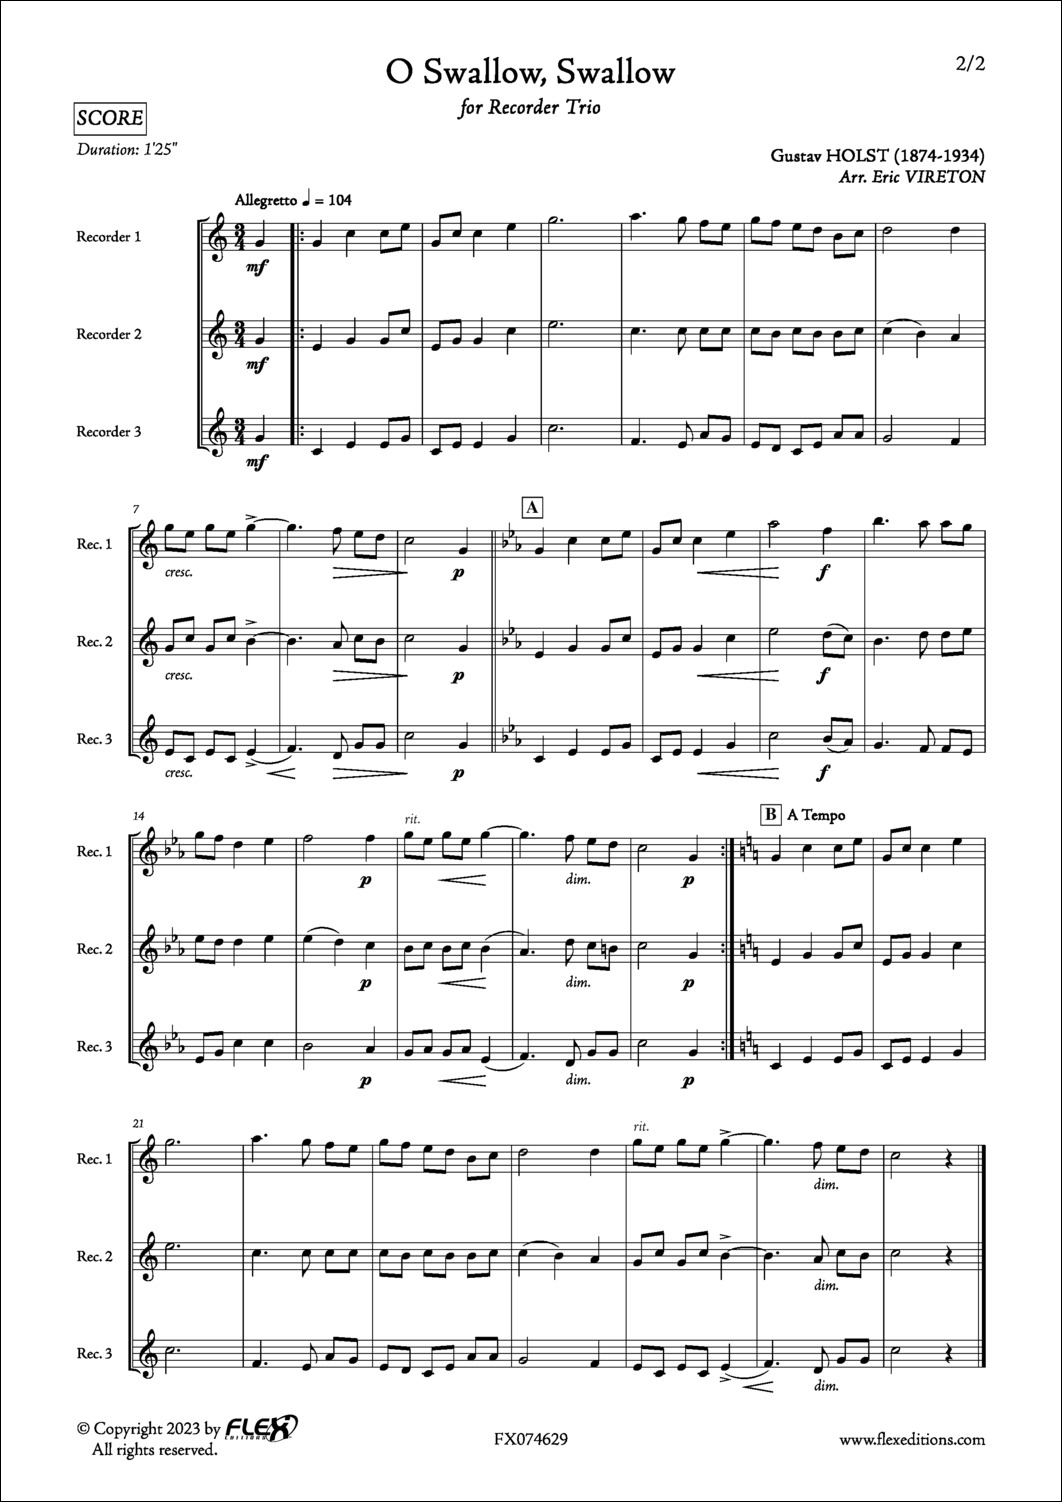 O Swallow, Swallow - G. HOLST - <font color=#666666>Recorder Trio</font>